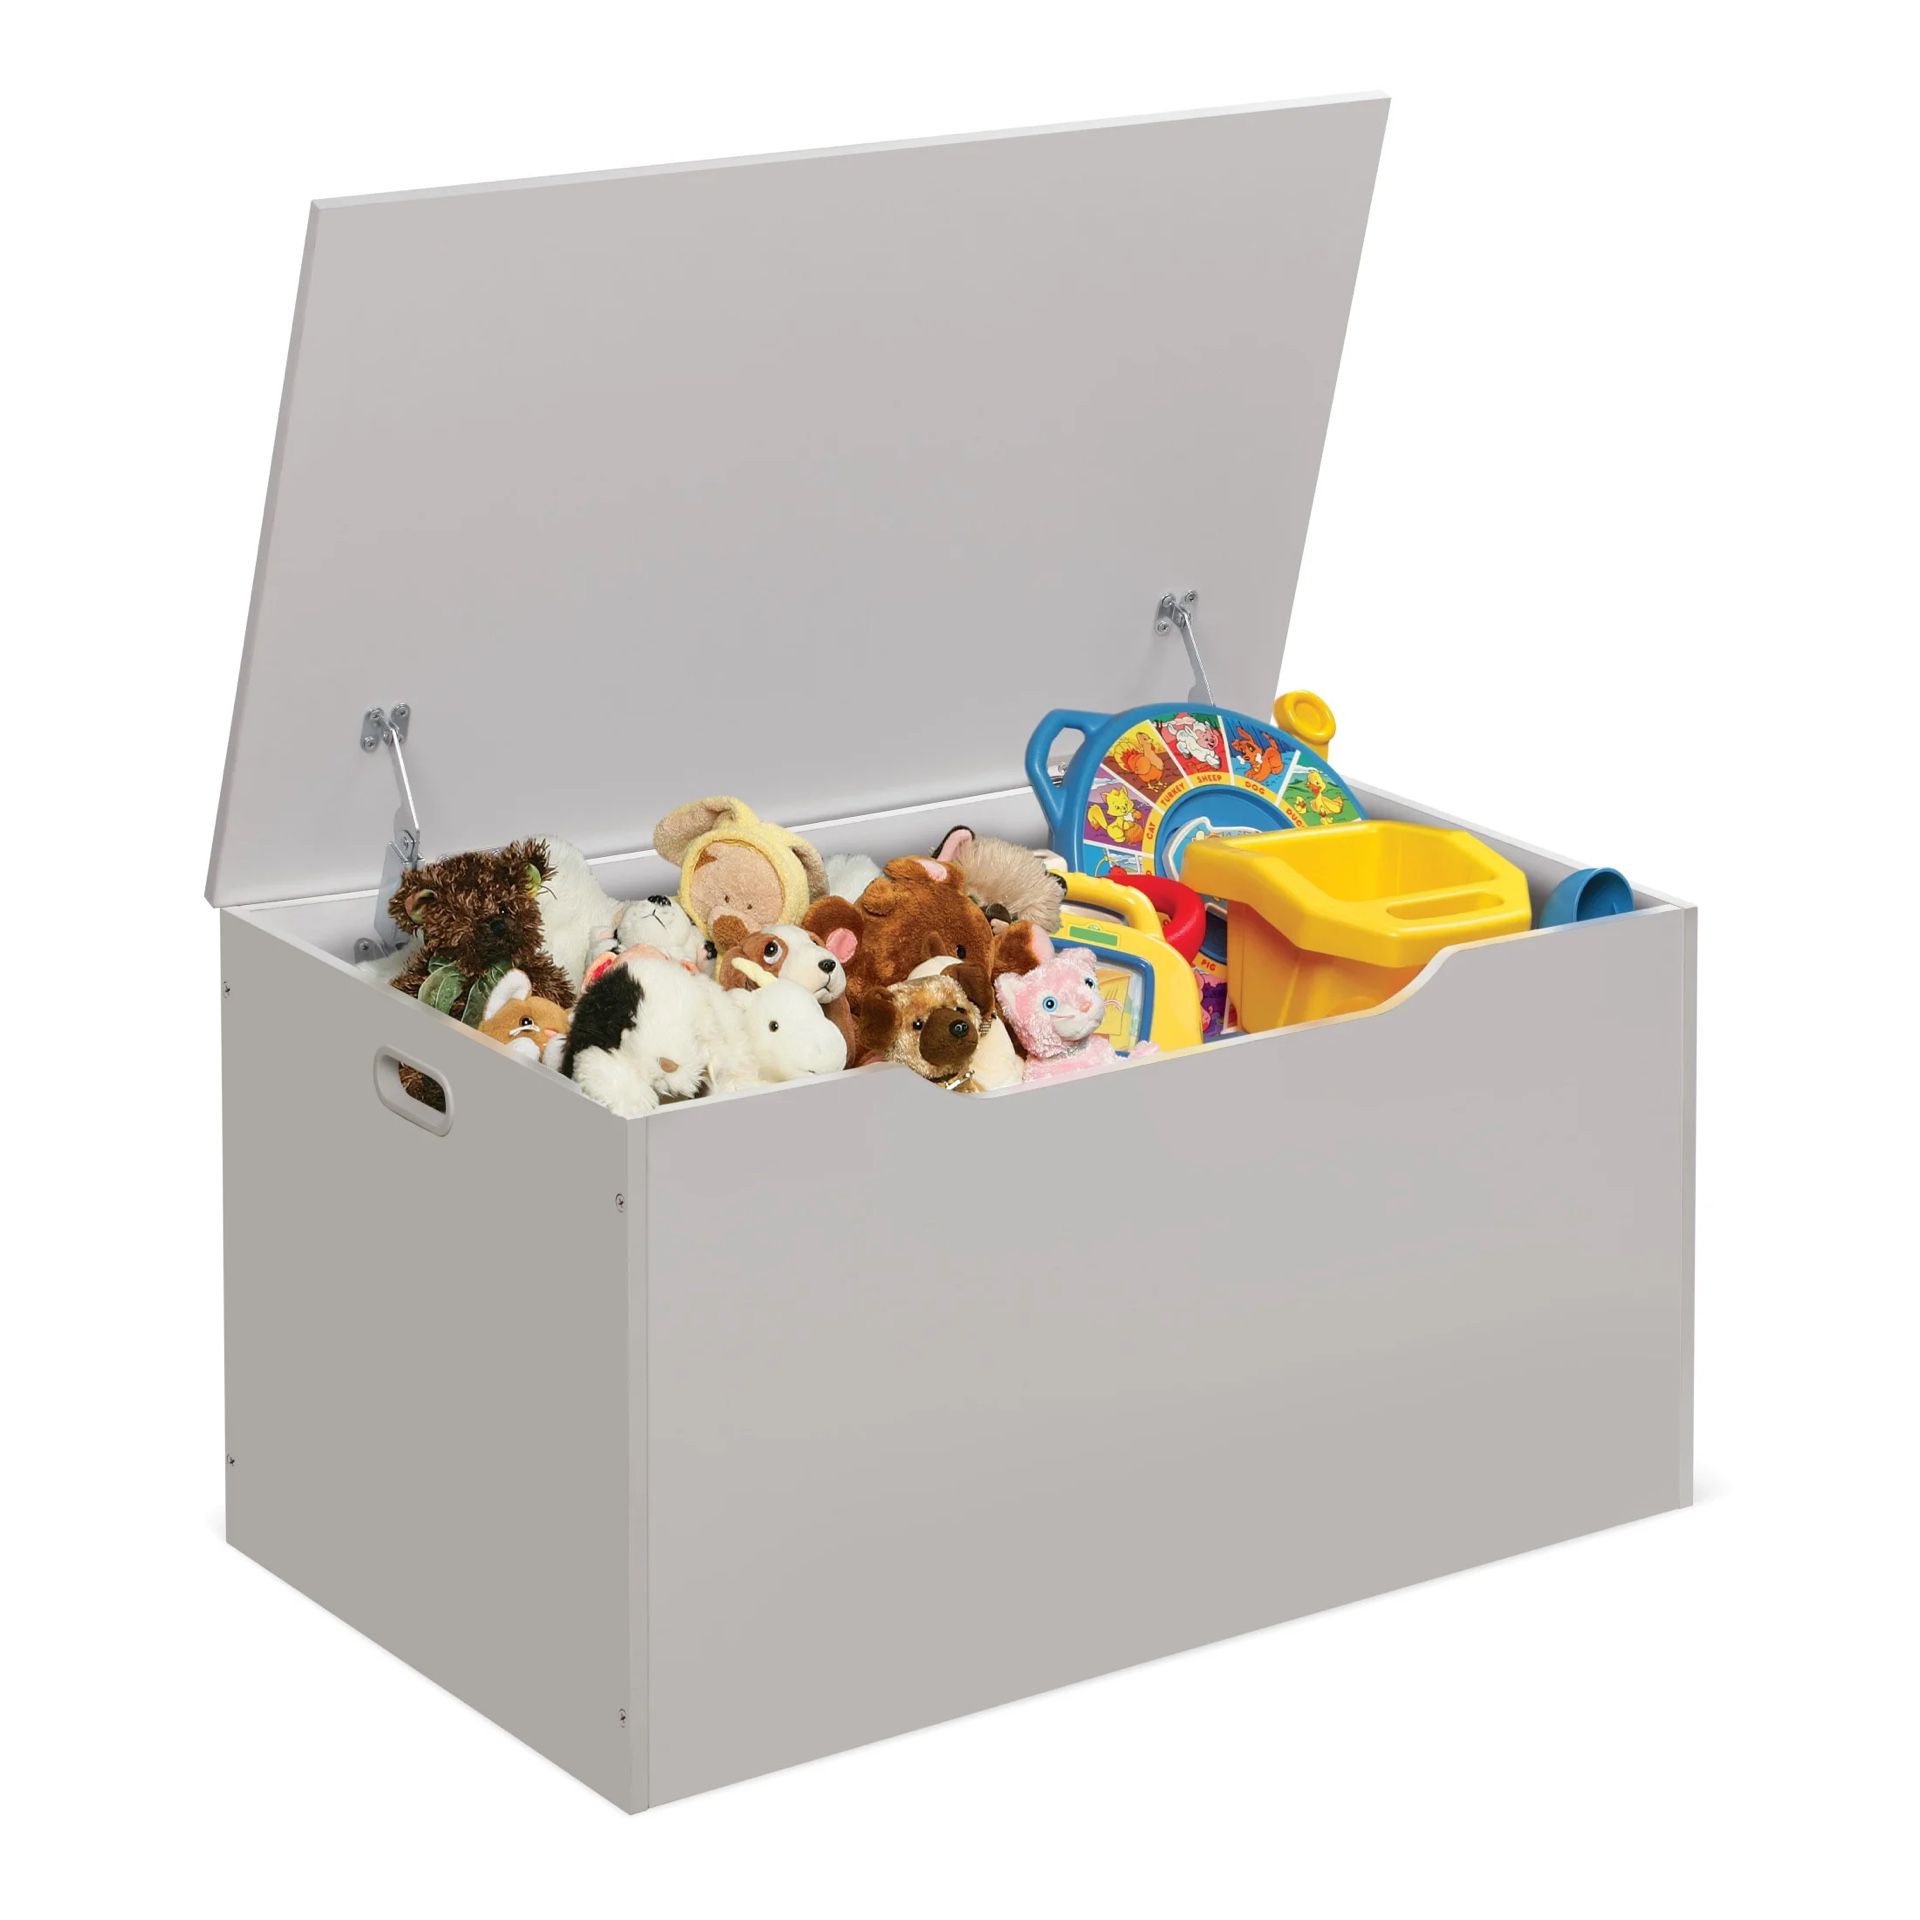 Badger Basket Kid's Wooden Flat Bench Top Toy and Storage Box 4.5 Cu ft. - White